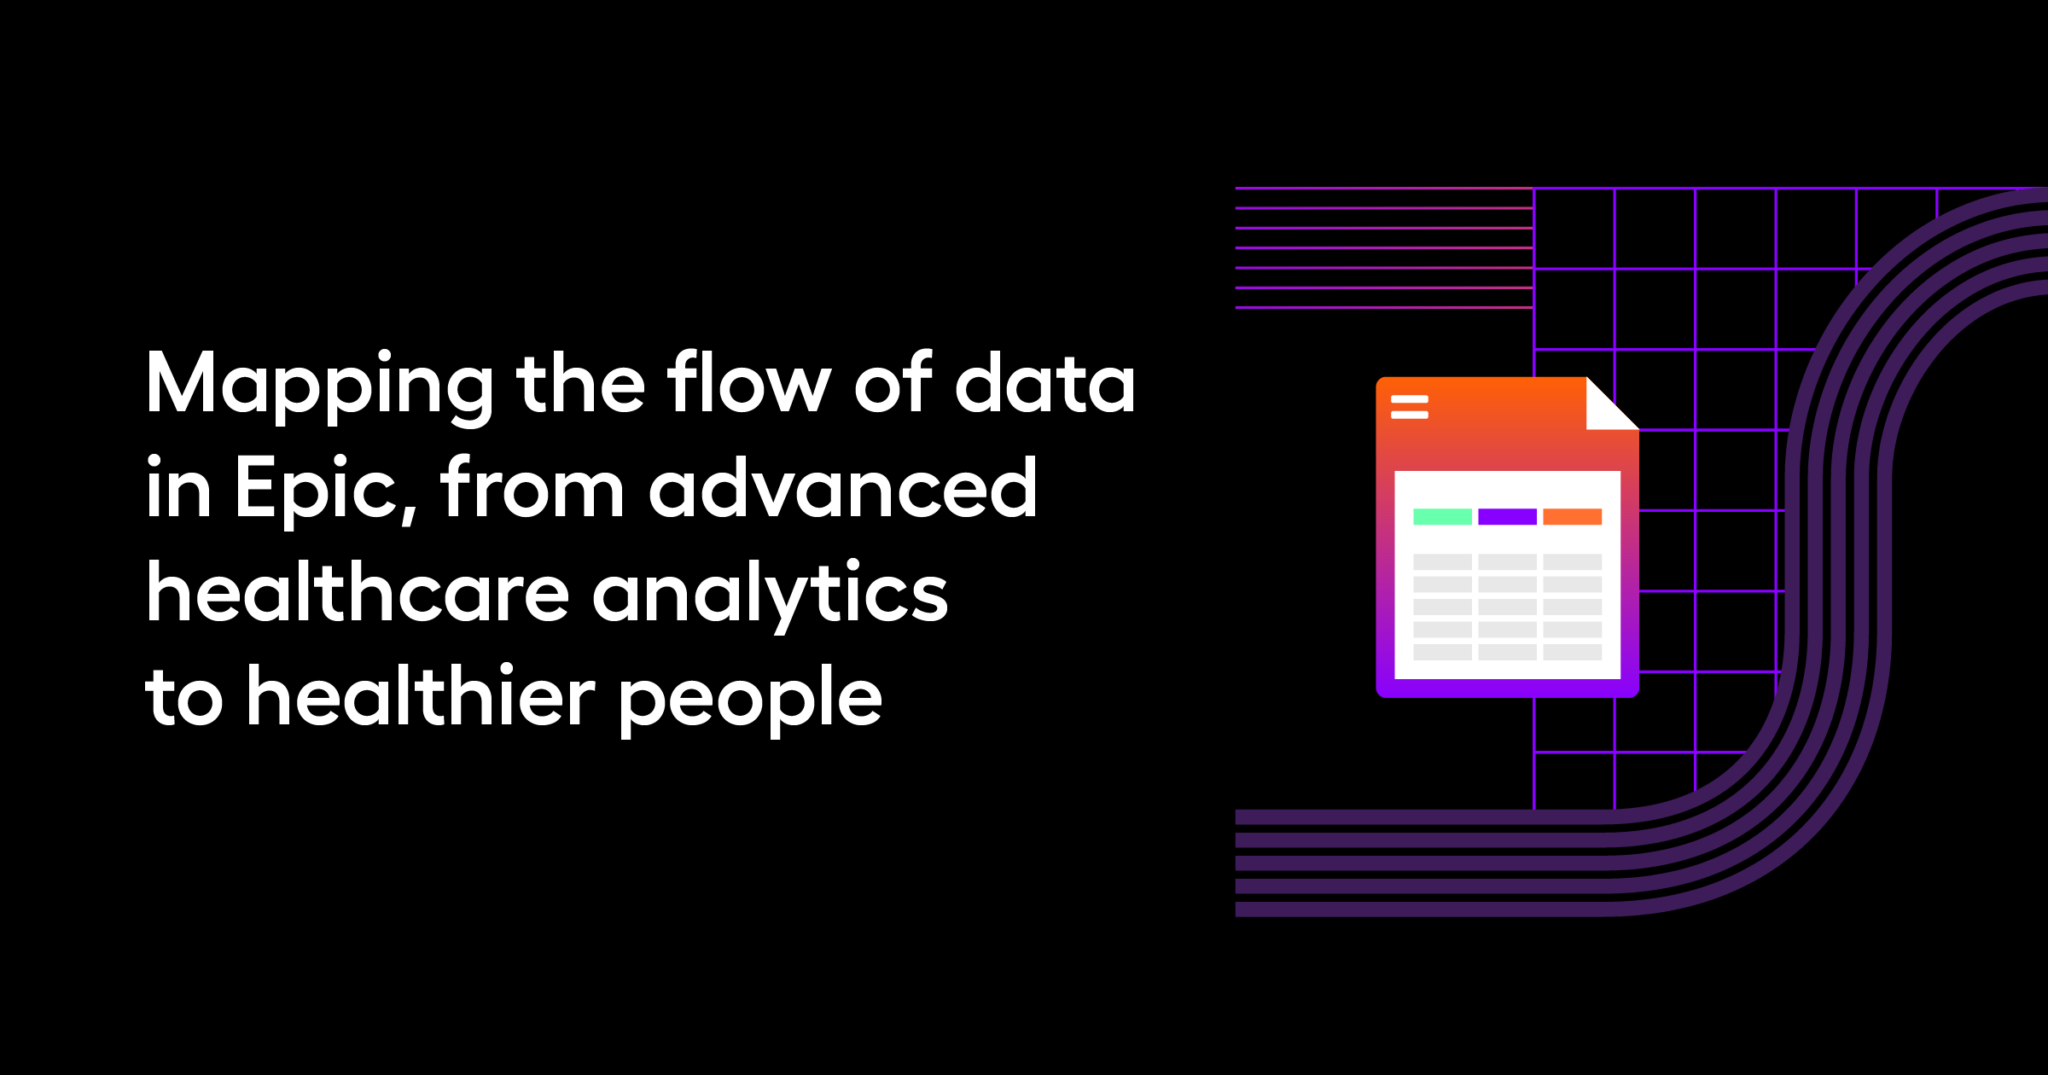 Mapping the flow of data in Epic, from advanced healthcare analytics to healthier people